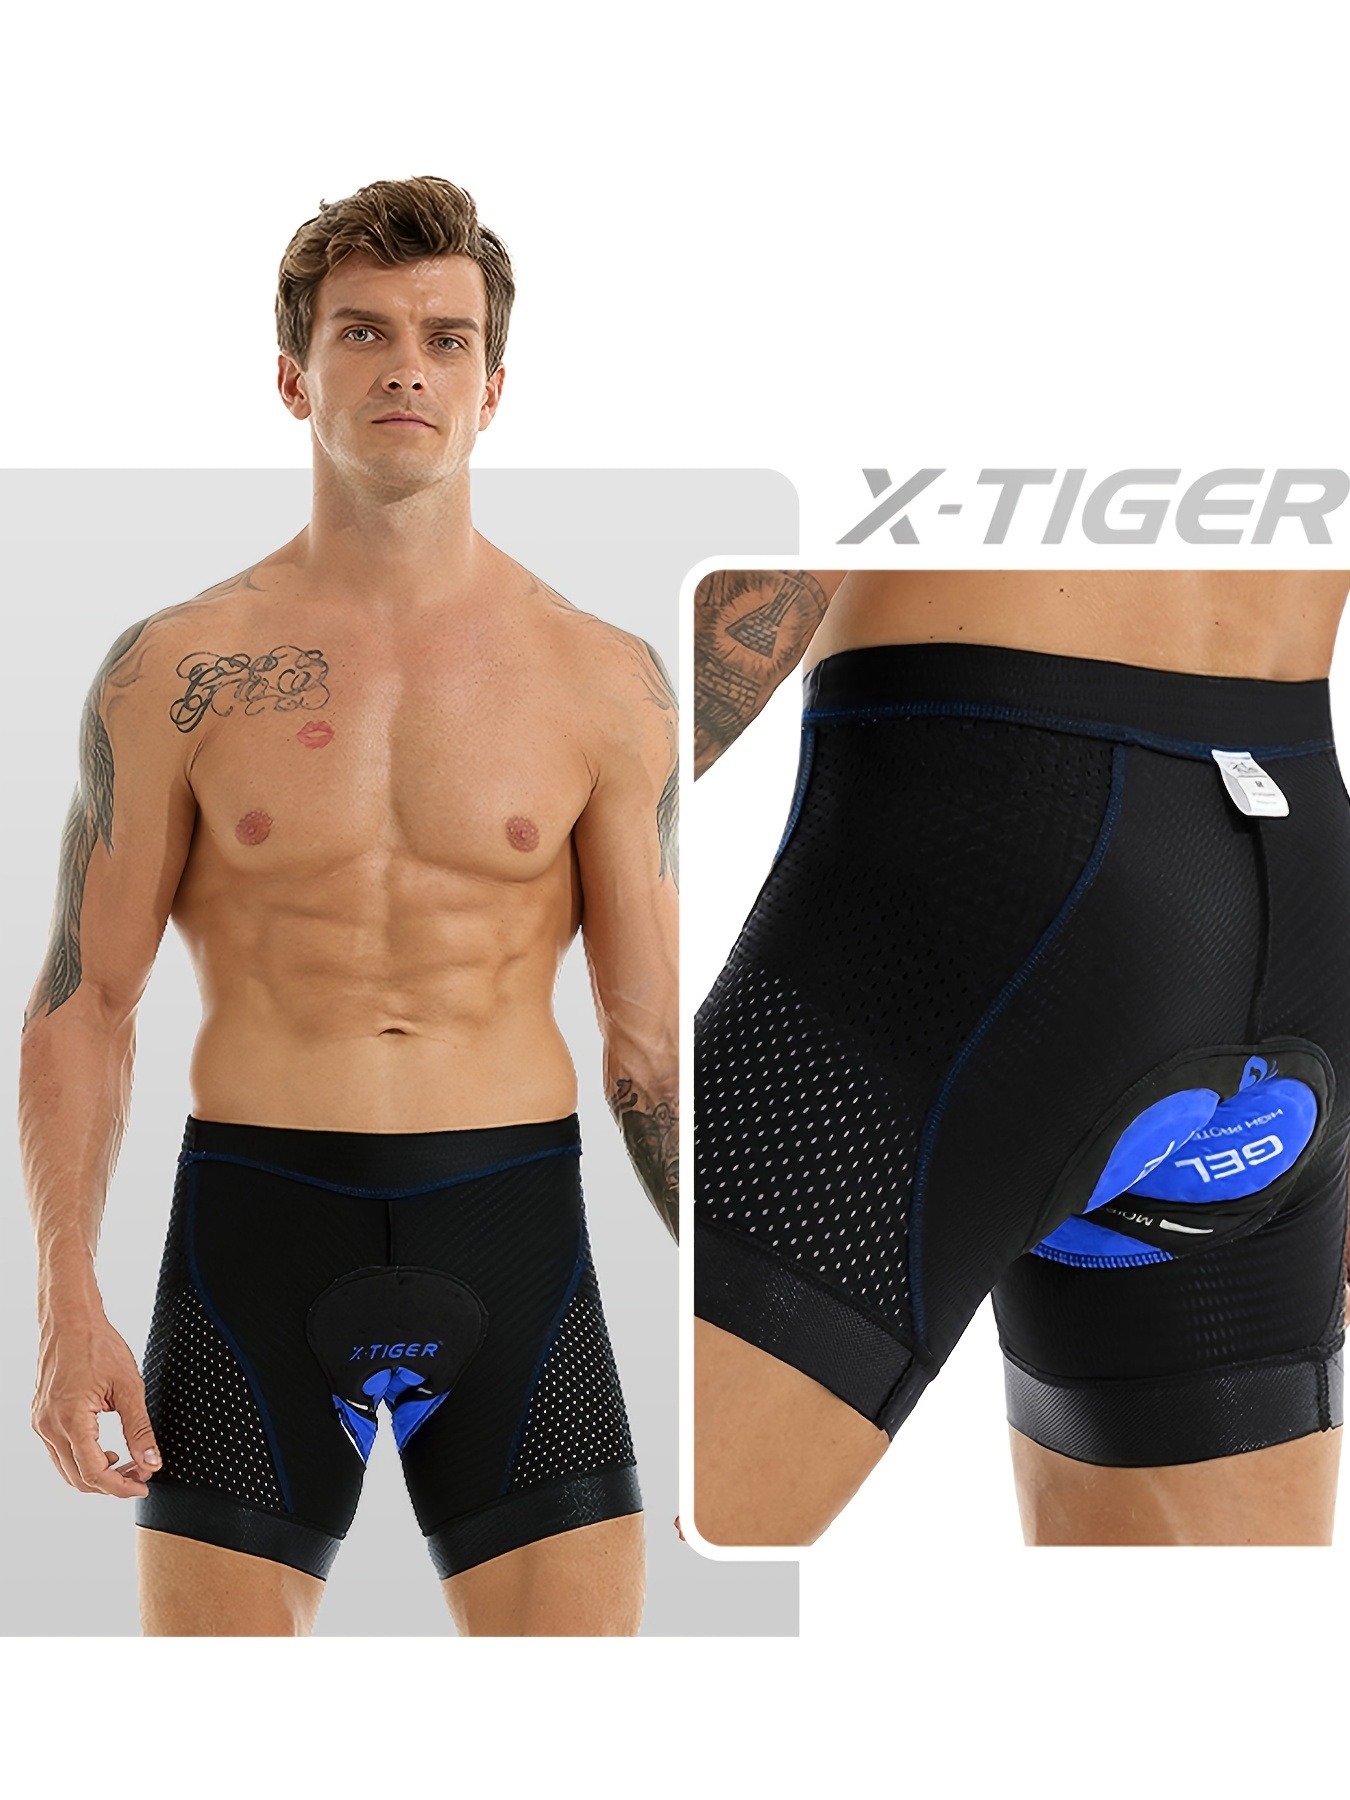 X-TIGER Men's Cycling Underwear Shorts 5D Padded Gel,MTB Biking Shorts  Pants with Breathable,Adsorbent Design